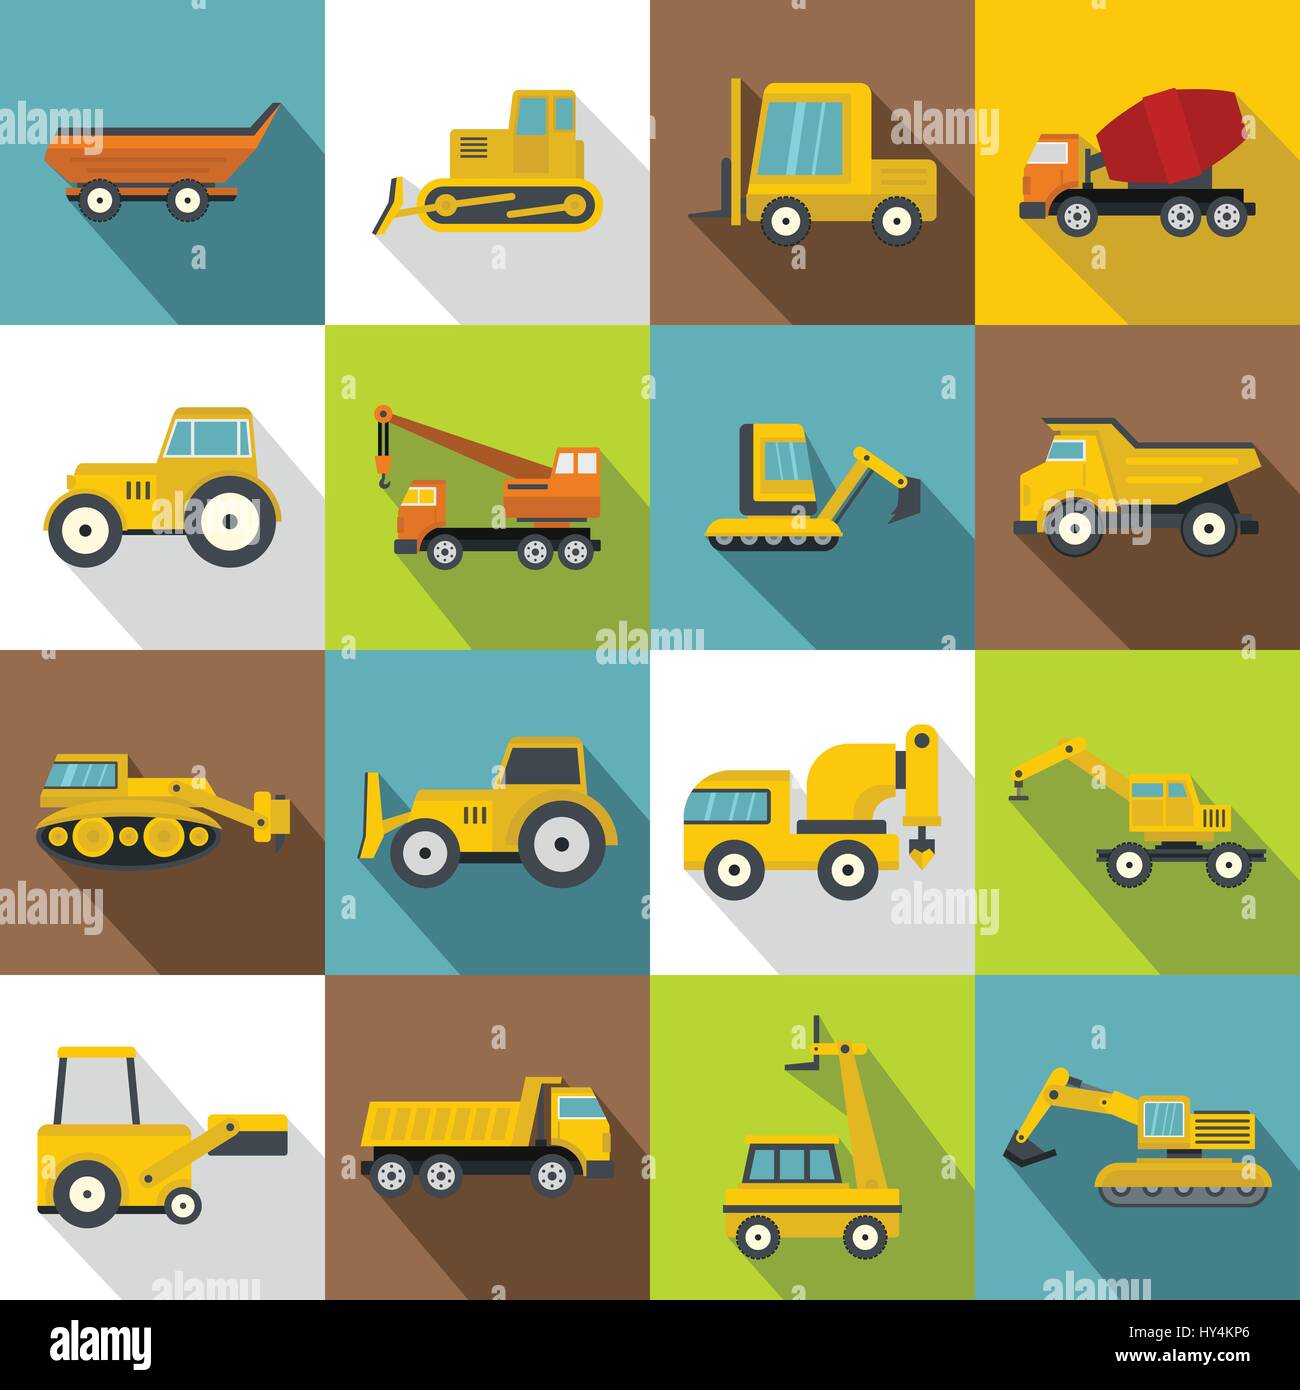 Building vehicles icons set, flat style Stock Vector